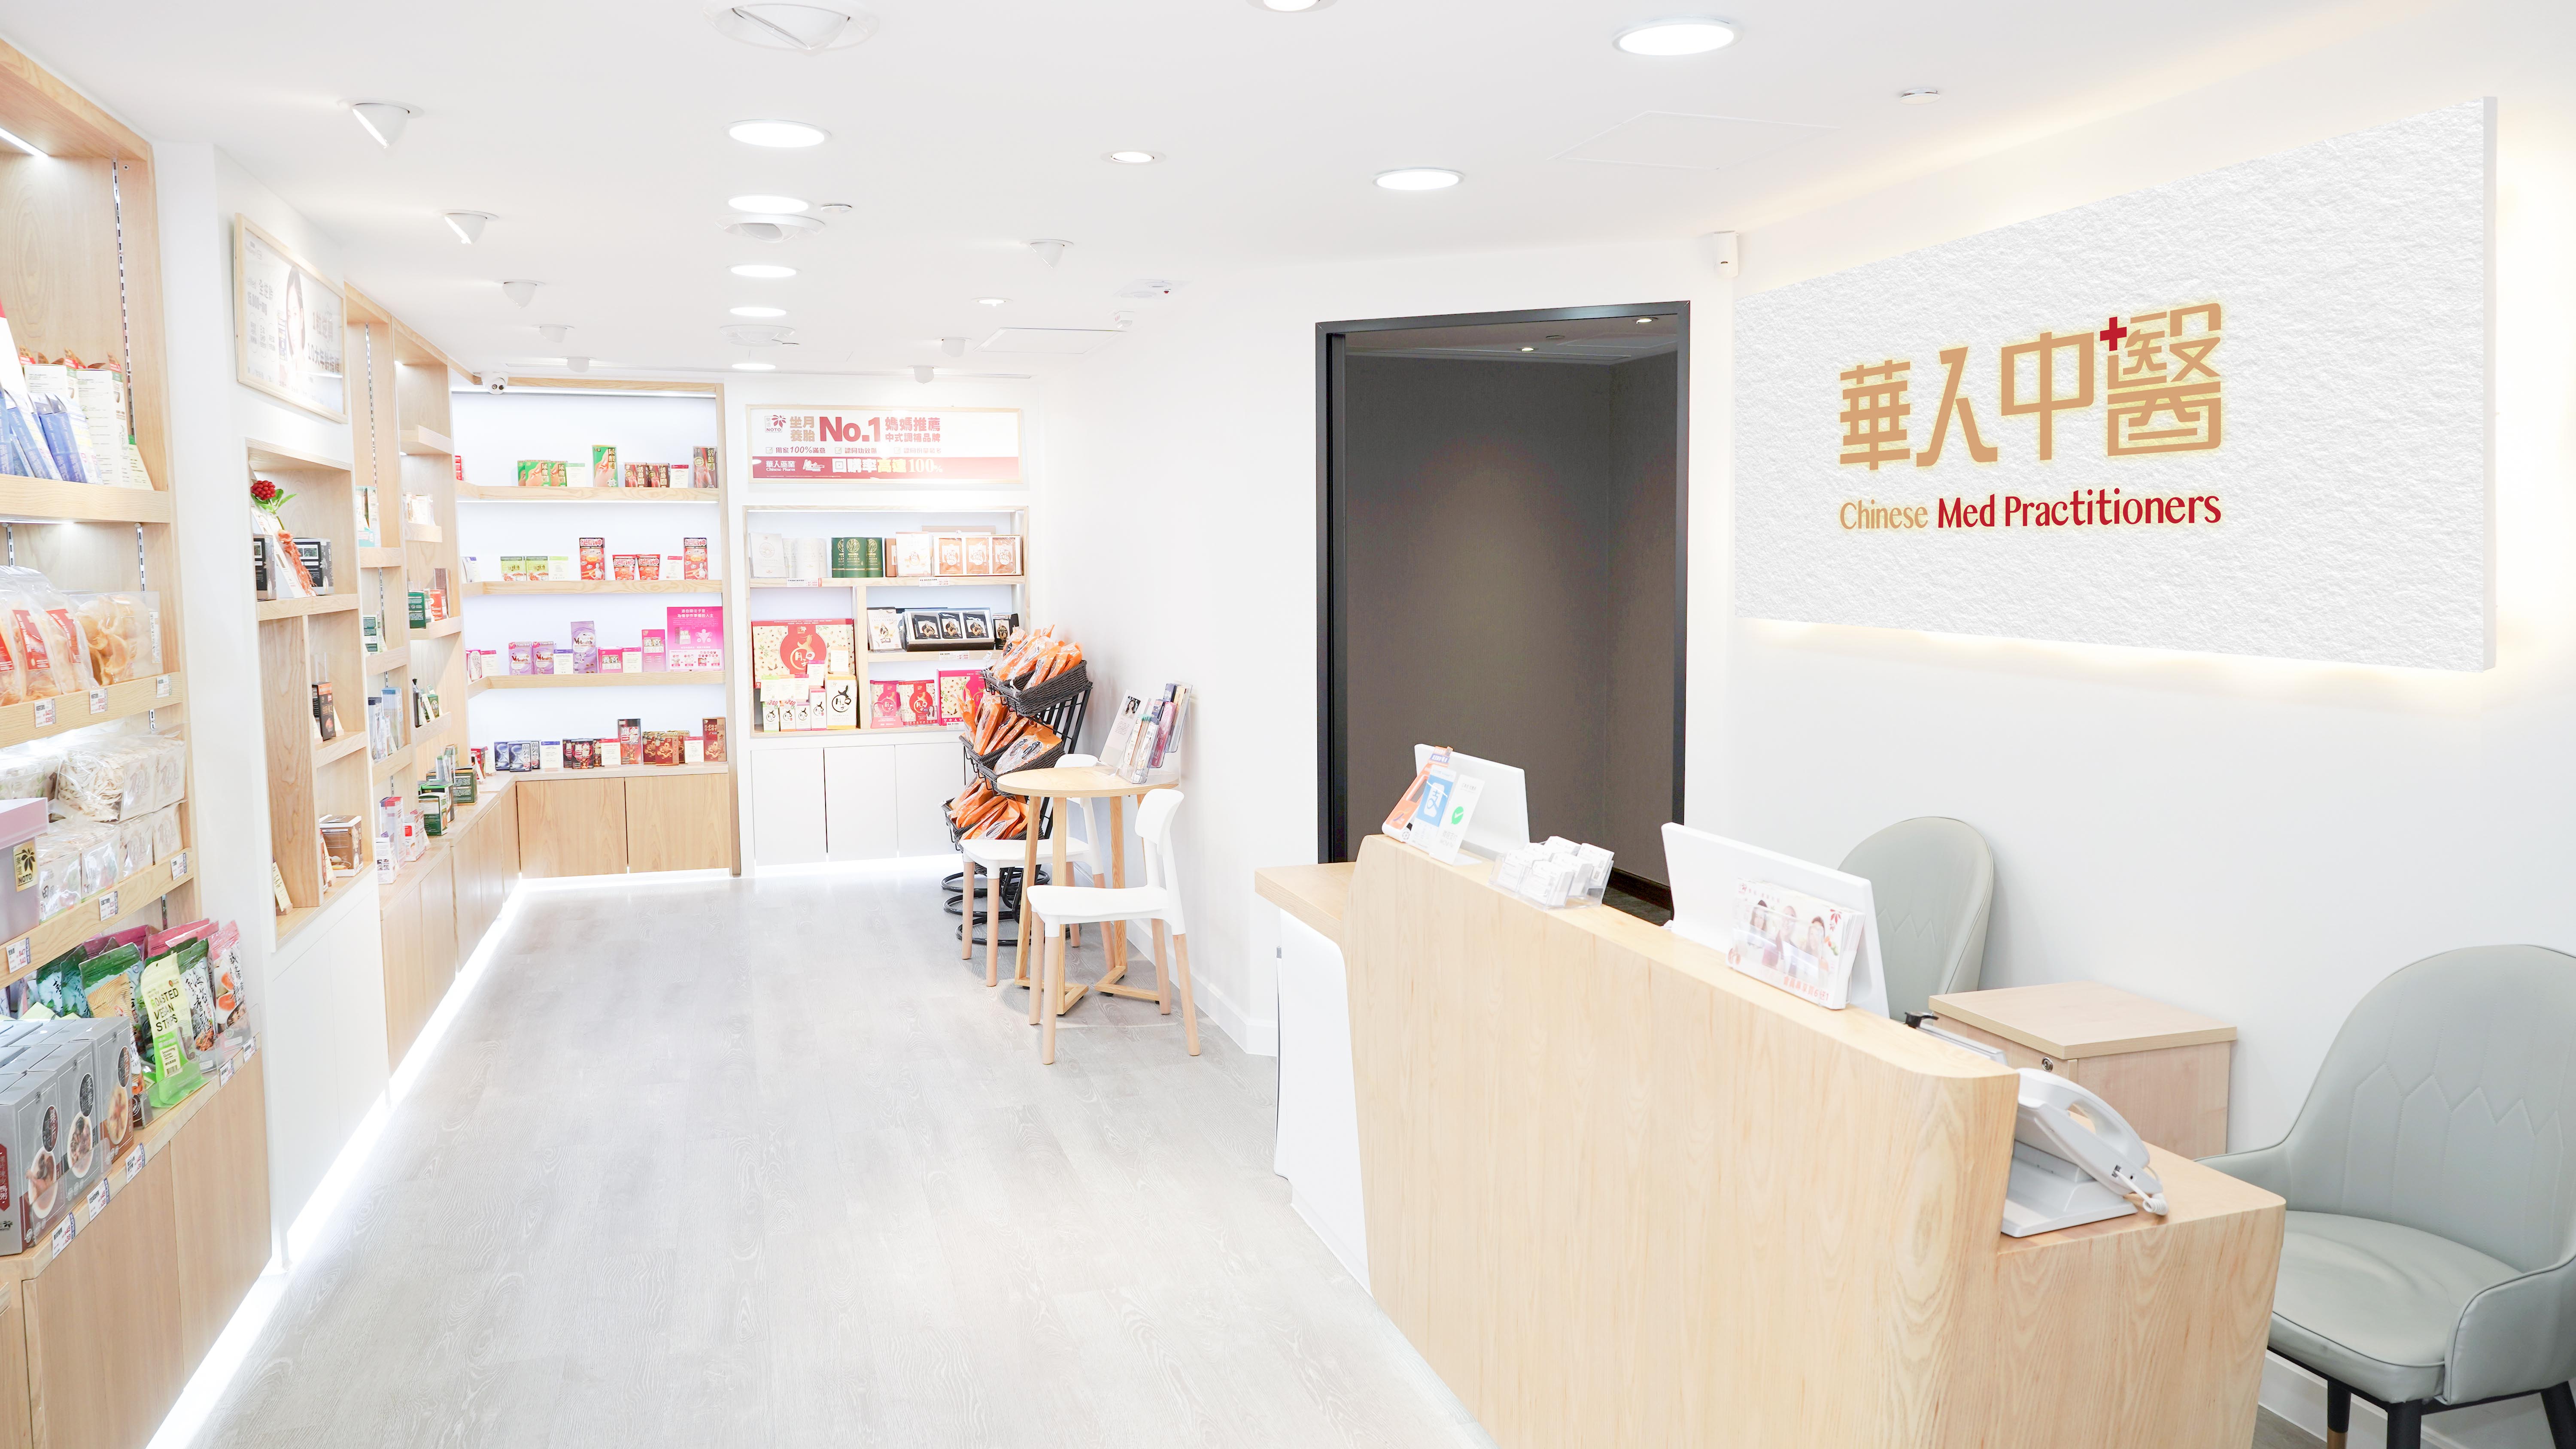 Chinese Medicine Clinic / Chinese Medicine Practitioner華人中醫 Chinese Pharmaceuticals (HK)  @ Hong Kong Traditional Chinese Medicine TCM Platform Hong Kong Chinese medicine clinic